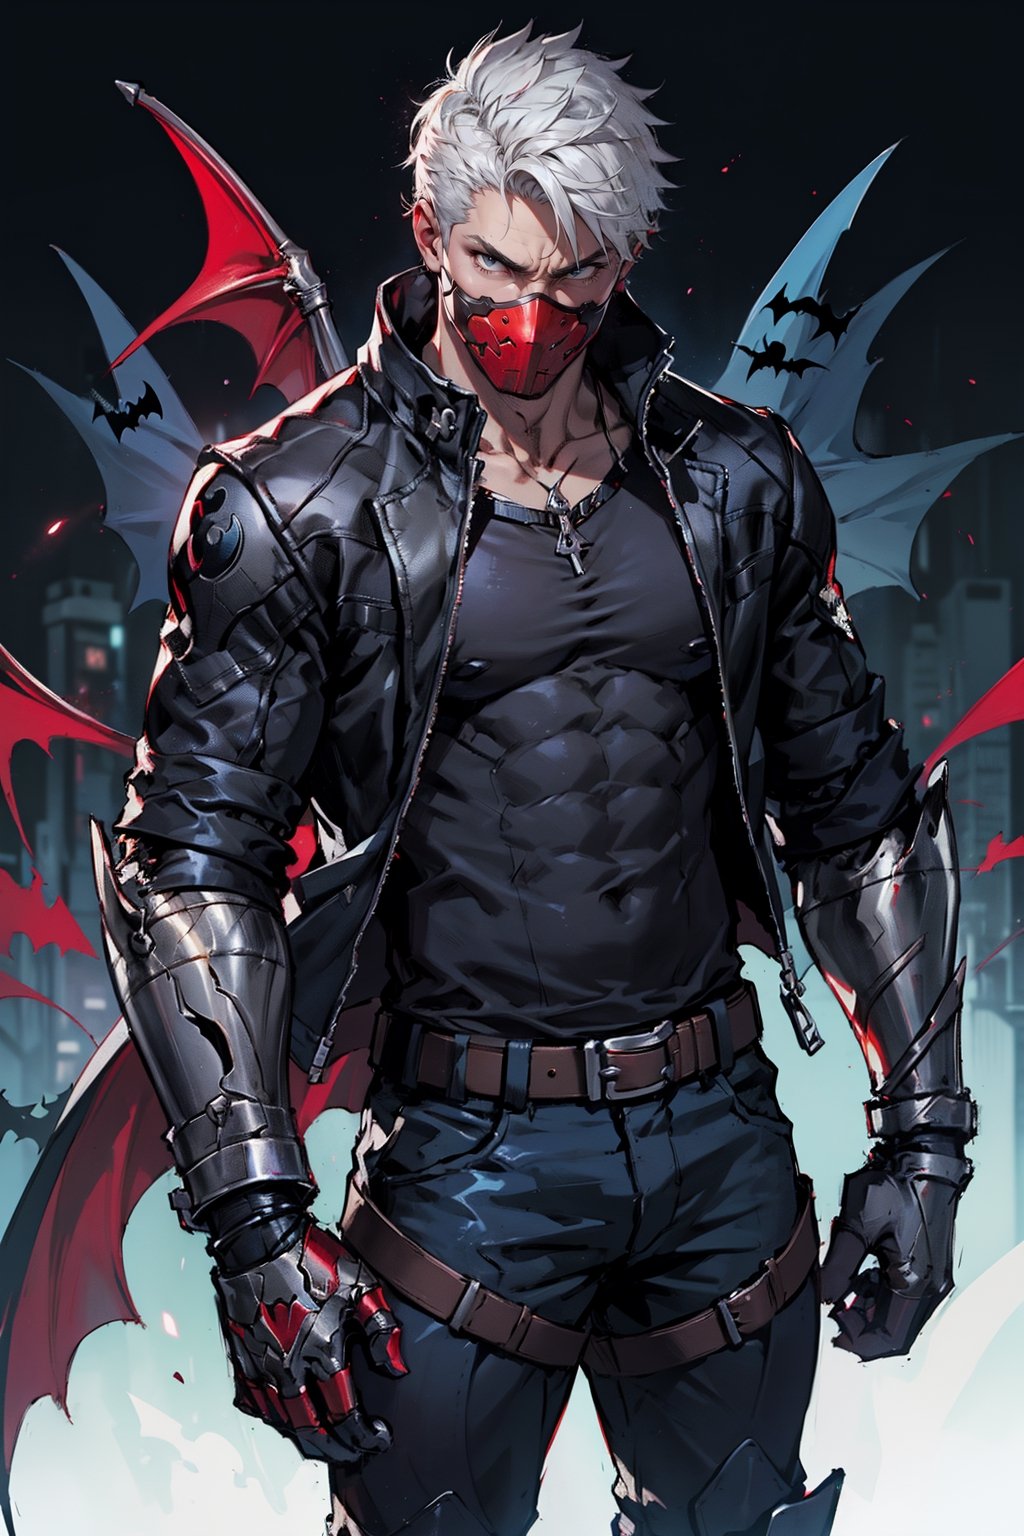 an accurate and detailed full-body shot of a male superhero character named Redon, 1male, (Red mask covering mouth:1.3), Tousled silver-white punk-rock hair, (Blue Eyes:1.2), (Stylish blue leather jacket with tactical elements), silver zippers and buckles, (Black undershirt:1.5), (right arm has a Metallic-blue cyberized gauntlet:1.4), (bare left arm:1.2),  (red arcane Bat symbol on chest:1.5), distressed leather moto pants, armored greaves, Knee guards, black combat boots, best quality, masterpiece, 4K, nero, rhdc, a man, gray skintight suit, gloves, belt, boots, red helmet, brown leather jacket